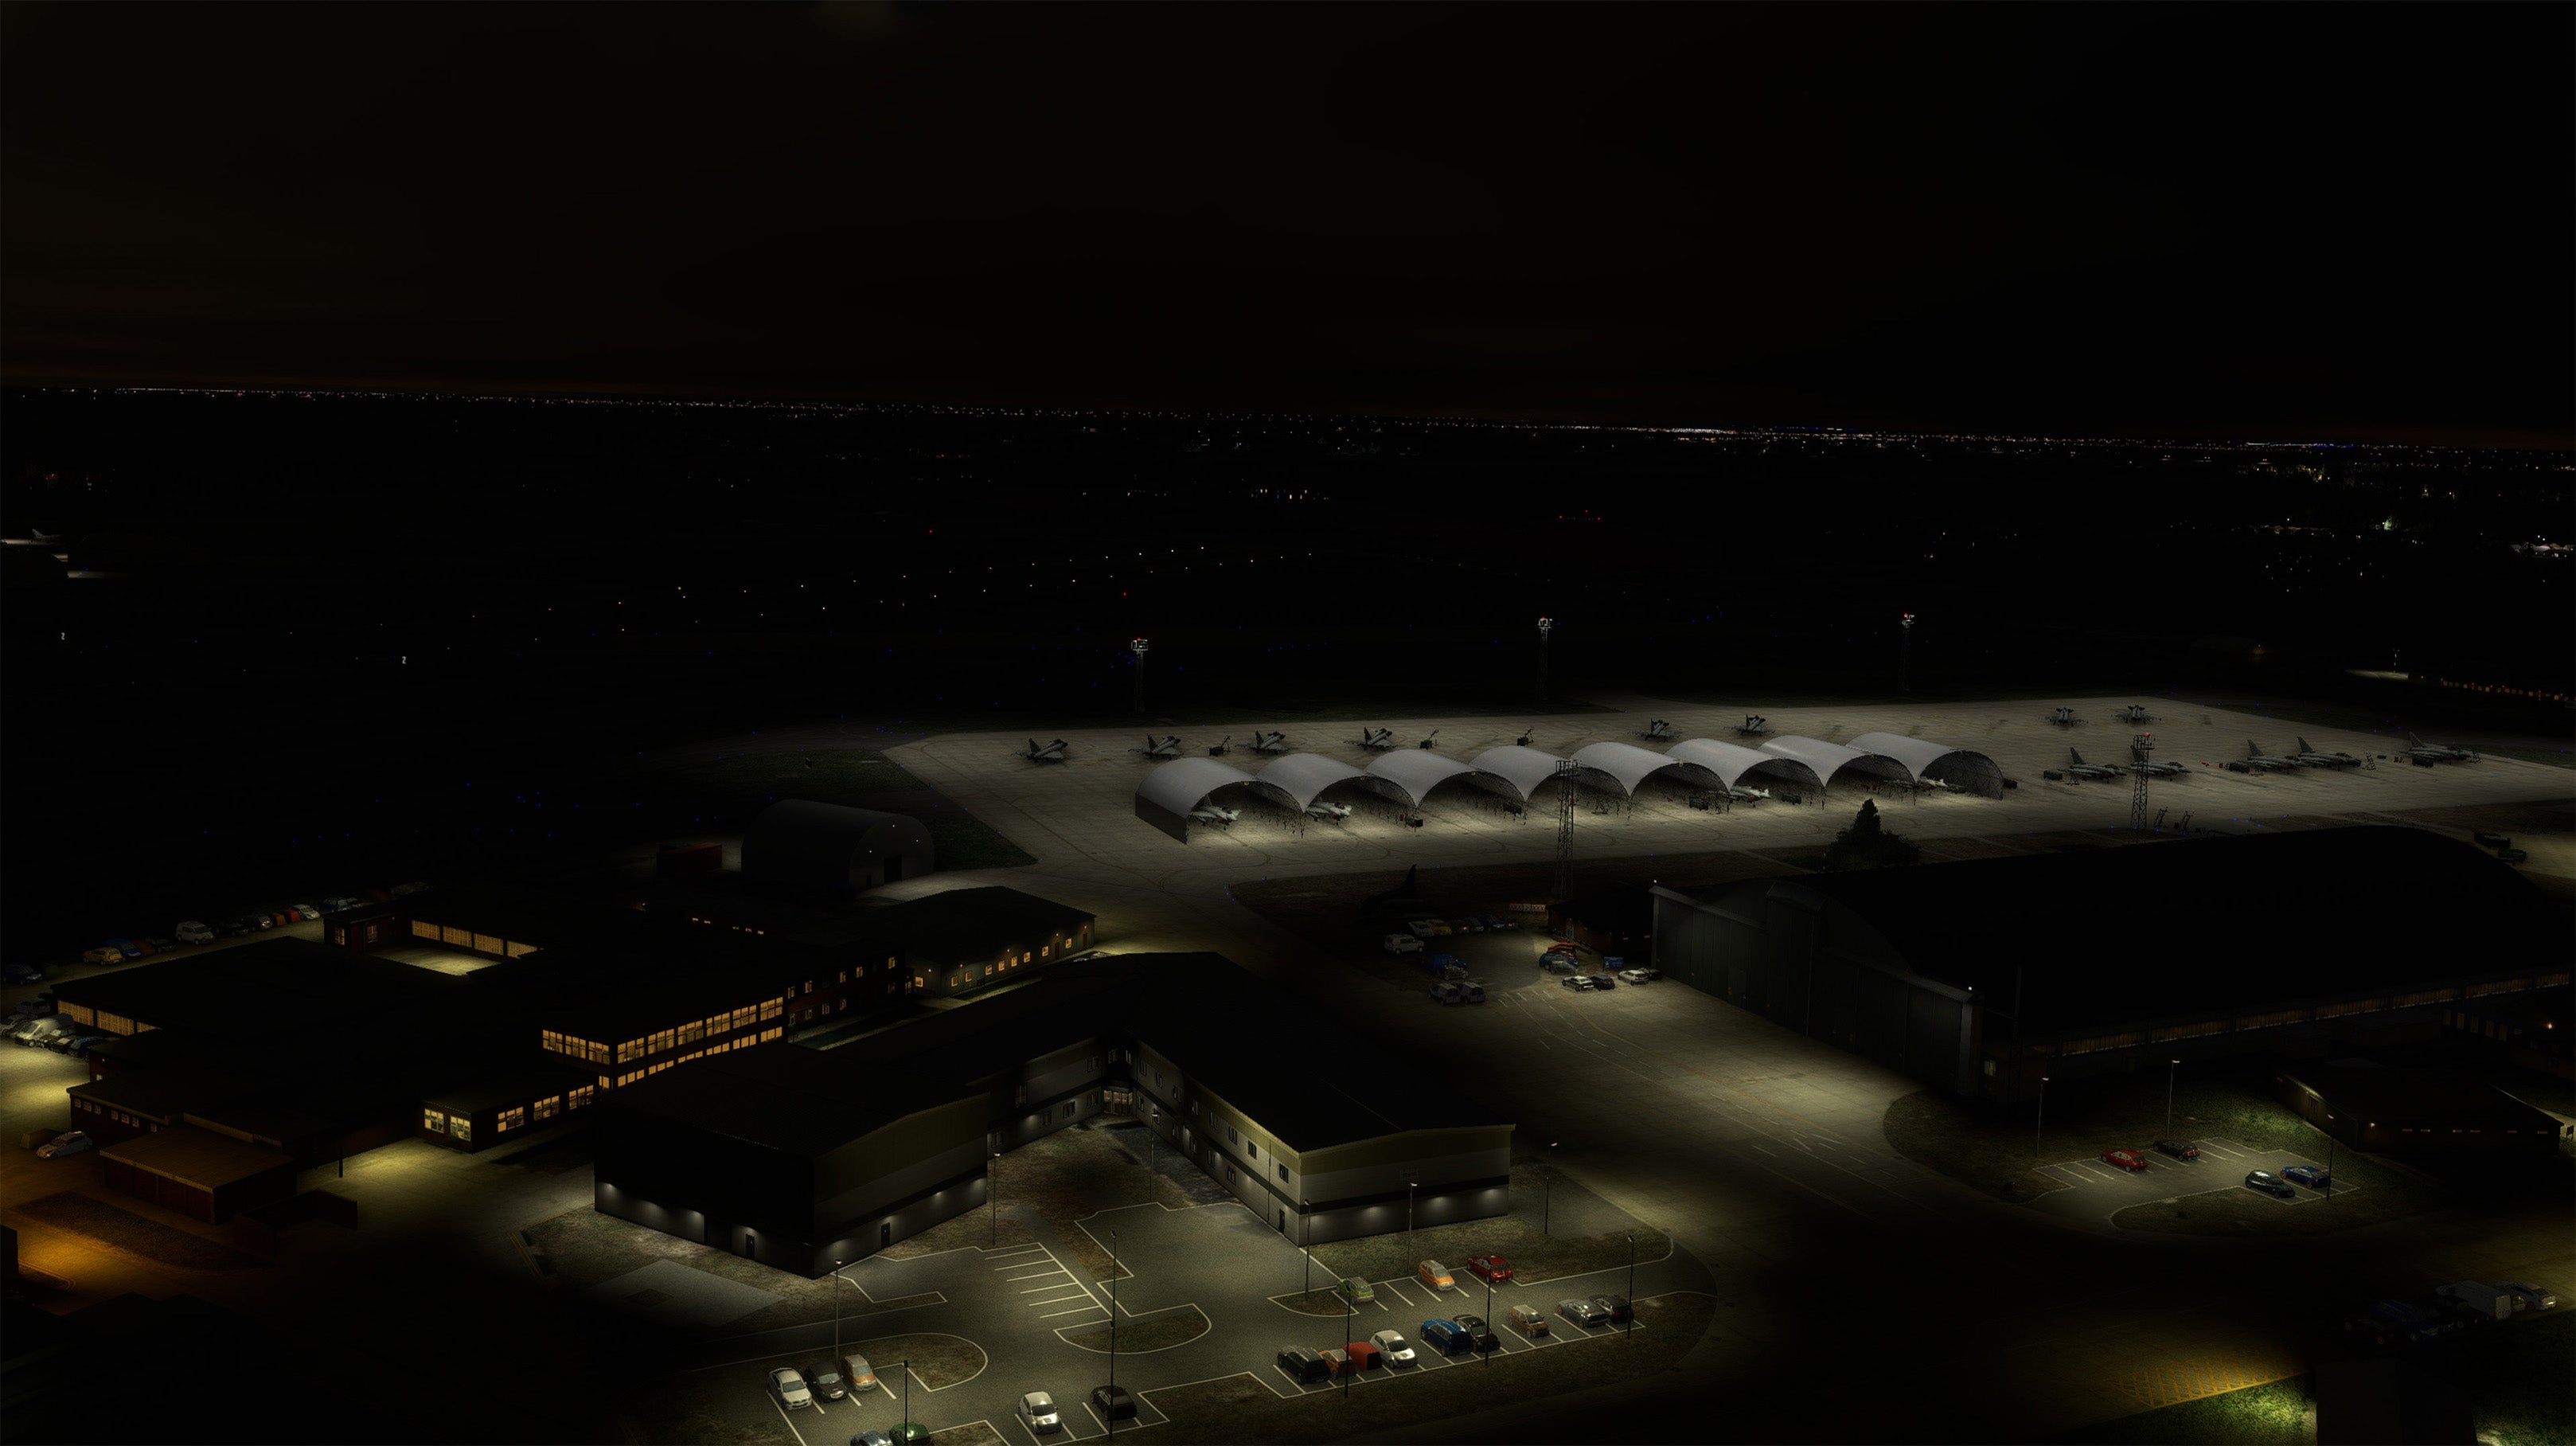 IM Scenery - Coningsby Air Base EGXC for MSFS